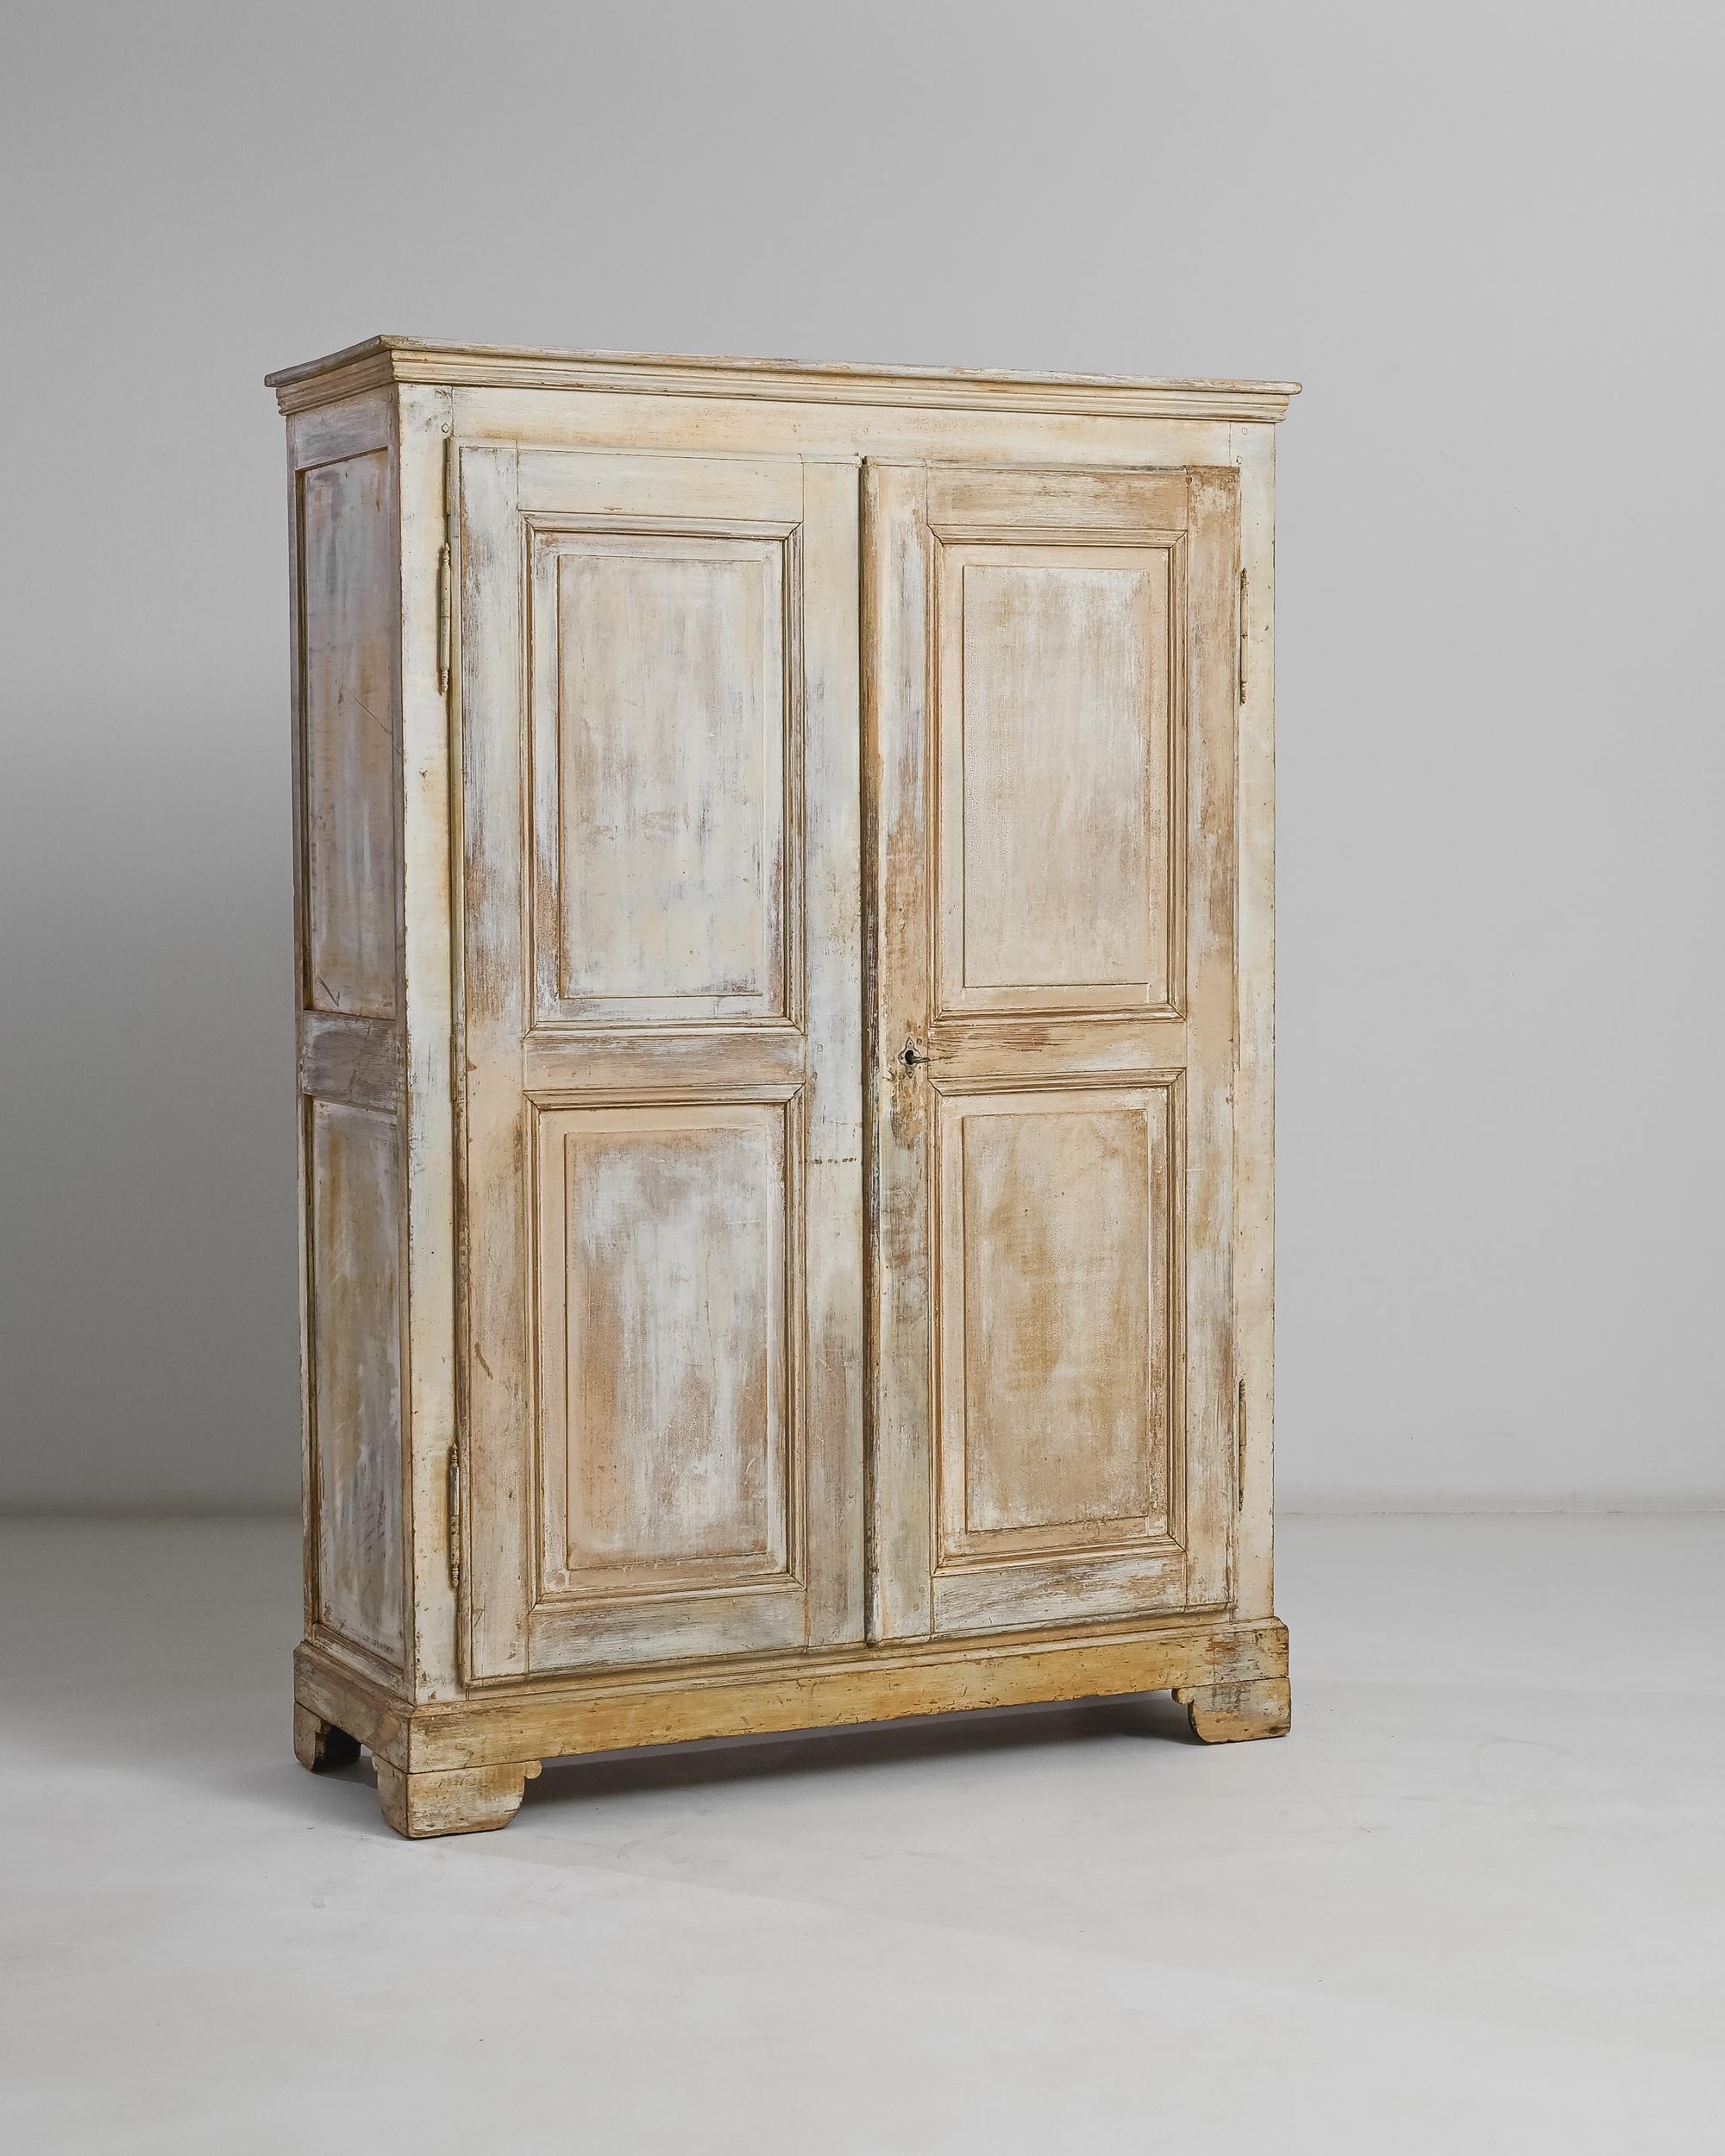 20th Century Turn of the Century French Wooden Cabinet